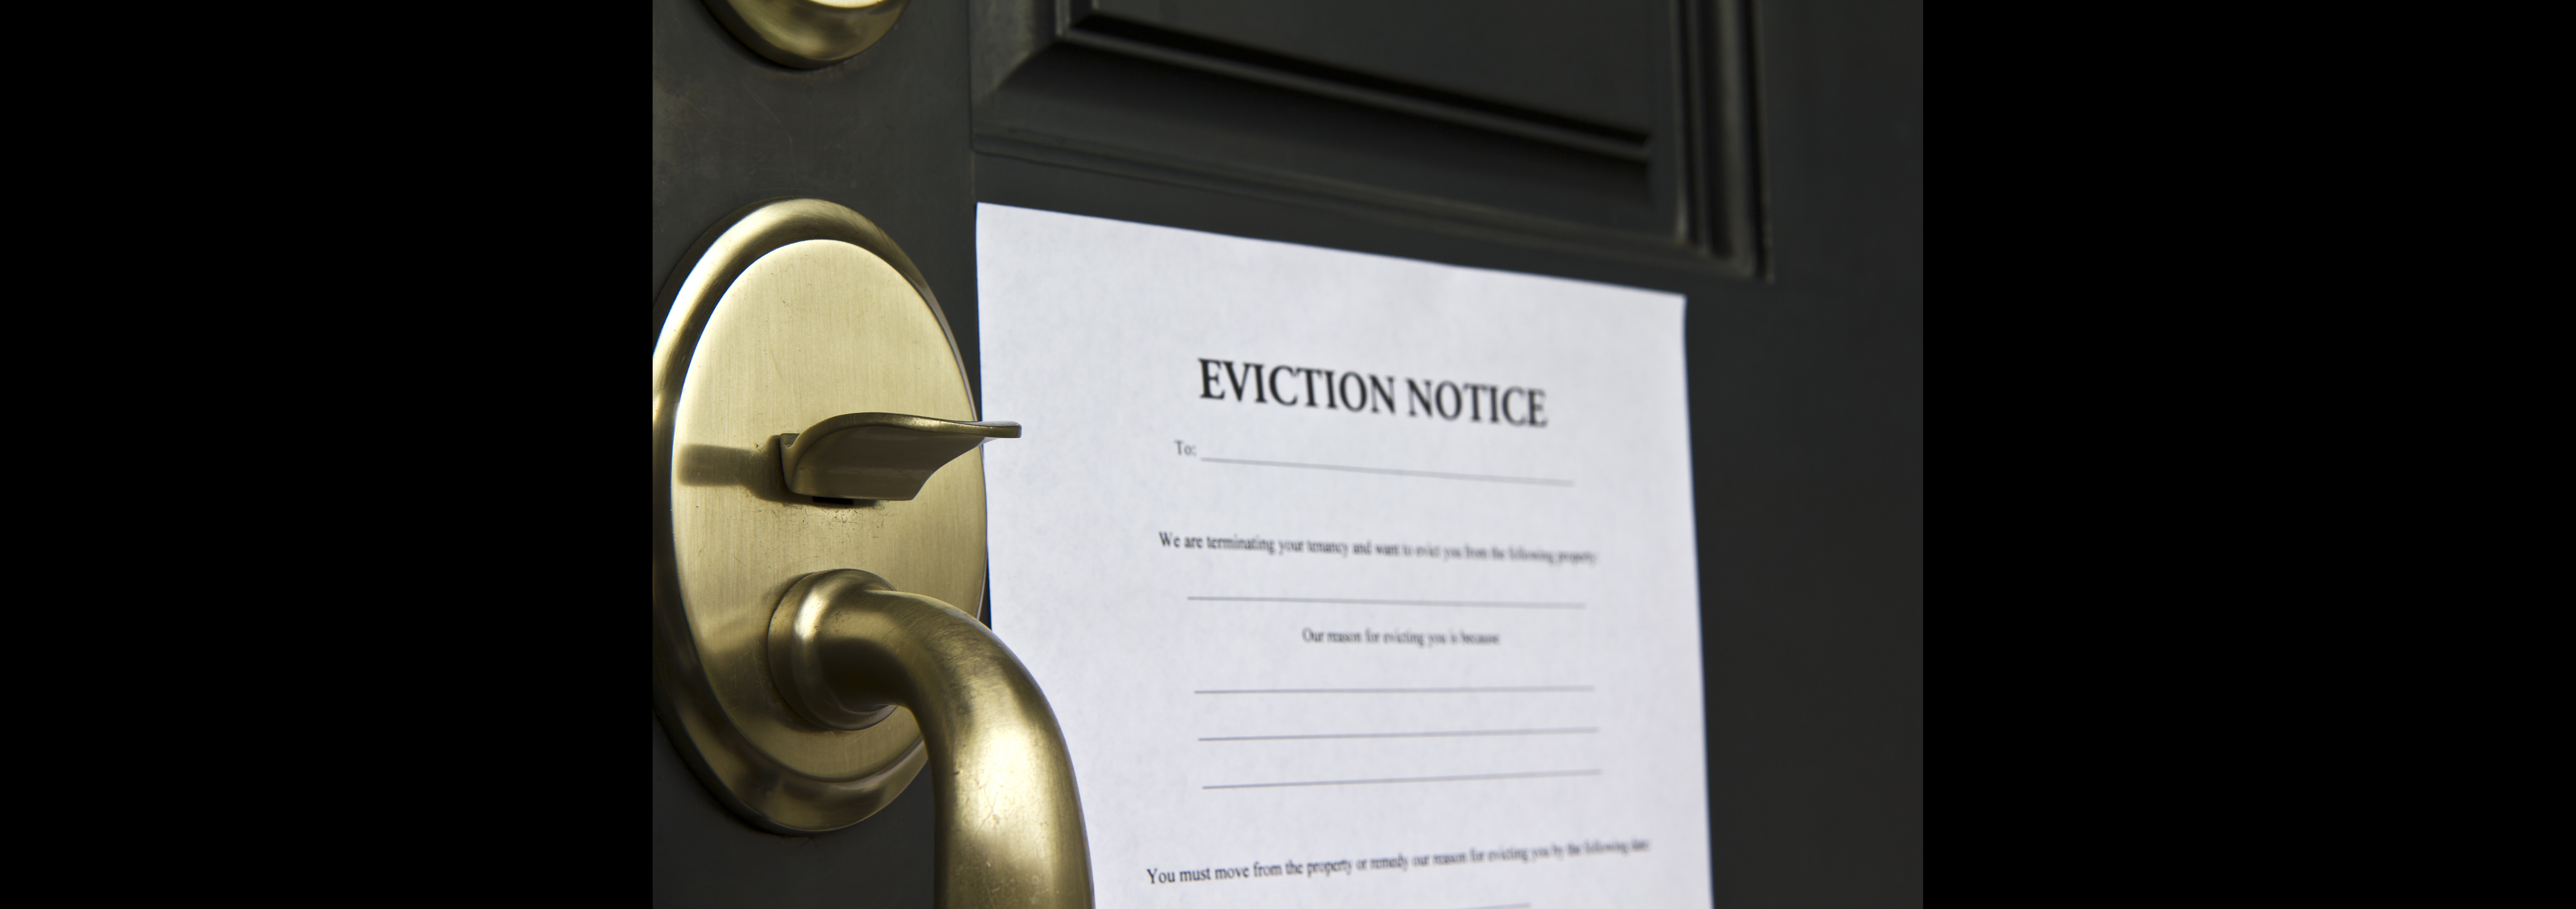 How would one create doors like the ones from Eviction Notice